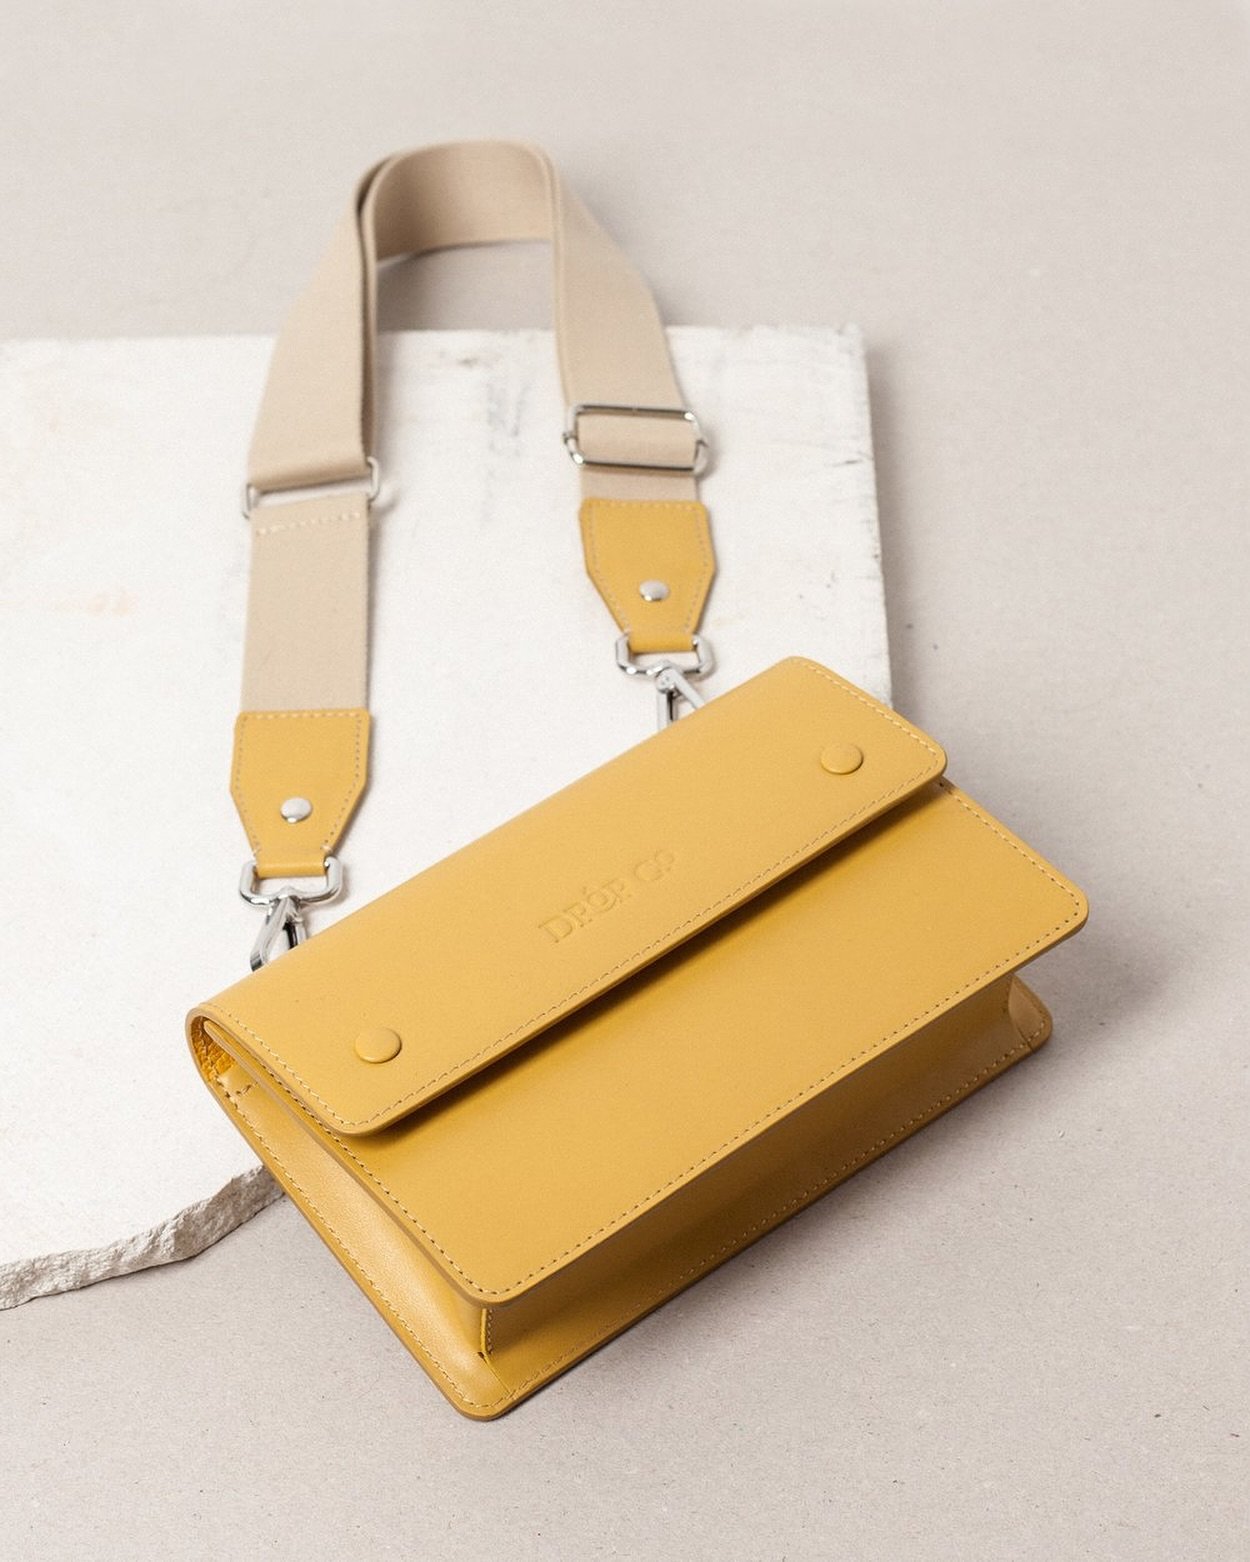 This minimalist small crossbody bag is made from Mustard yellow calf leather with clean, structured and timeless design to carry your phone, keys, small wallet, and your favorite lip product.

#fashion #handcrafted #styleinspiration #design #essentia